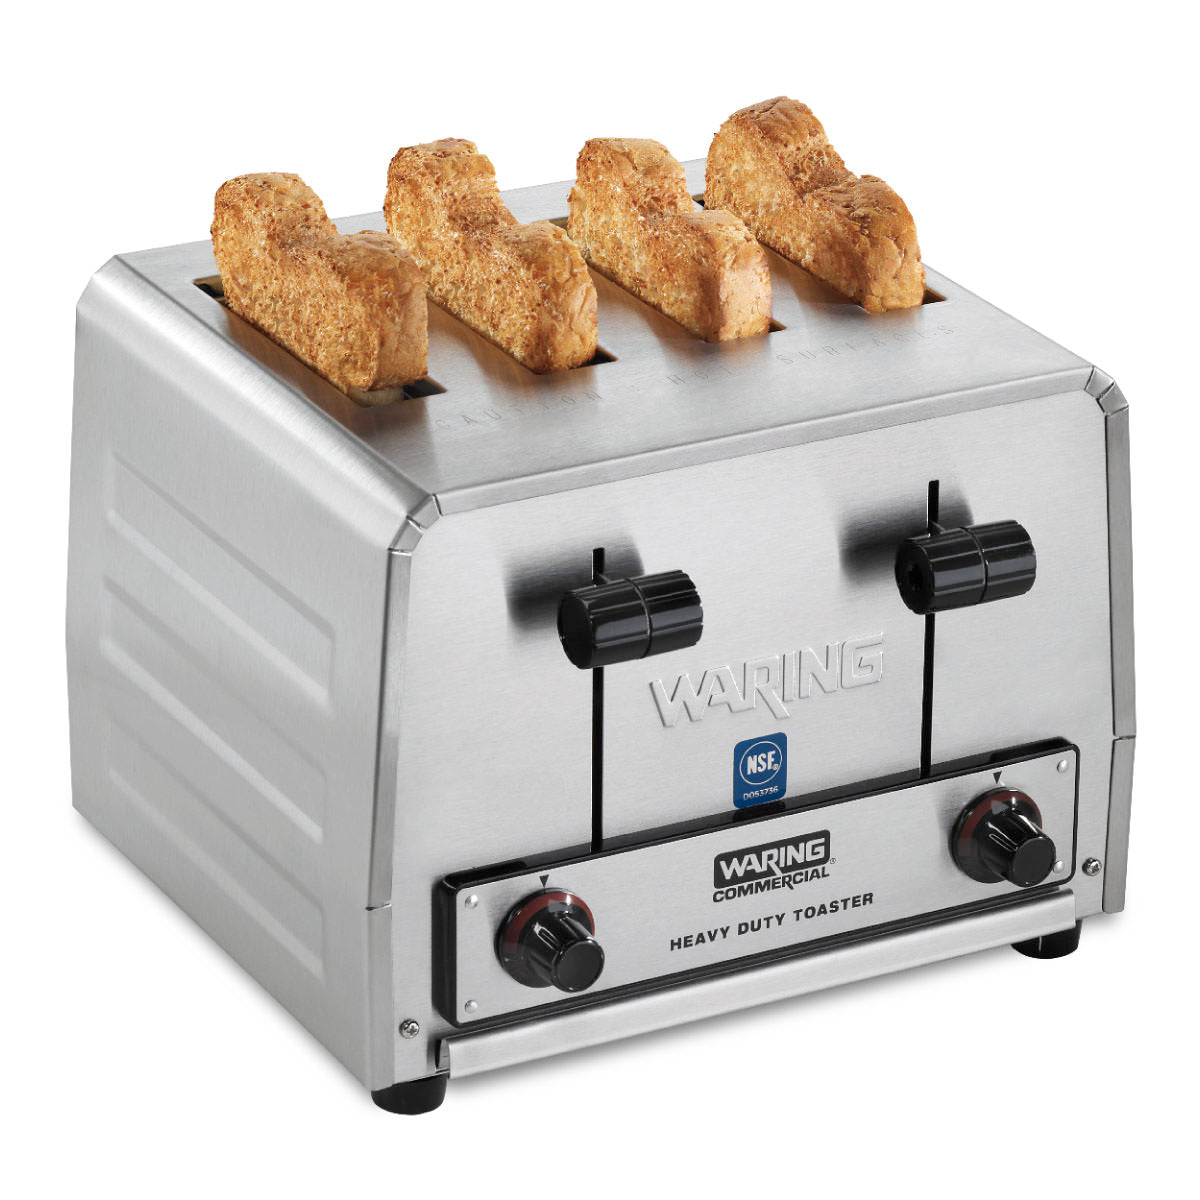 WCT805B 4-Slice Commercial Heavy-Duty Toaster by Waring Commercial